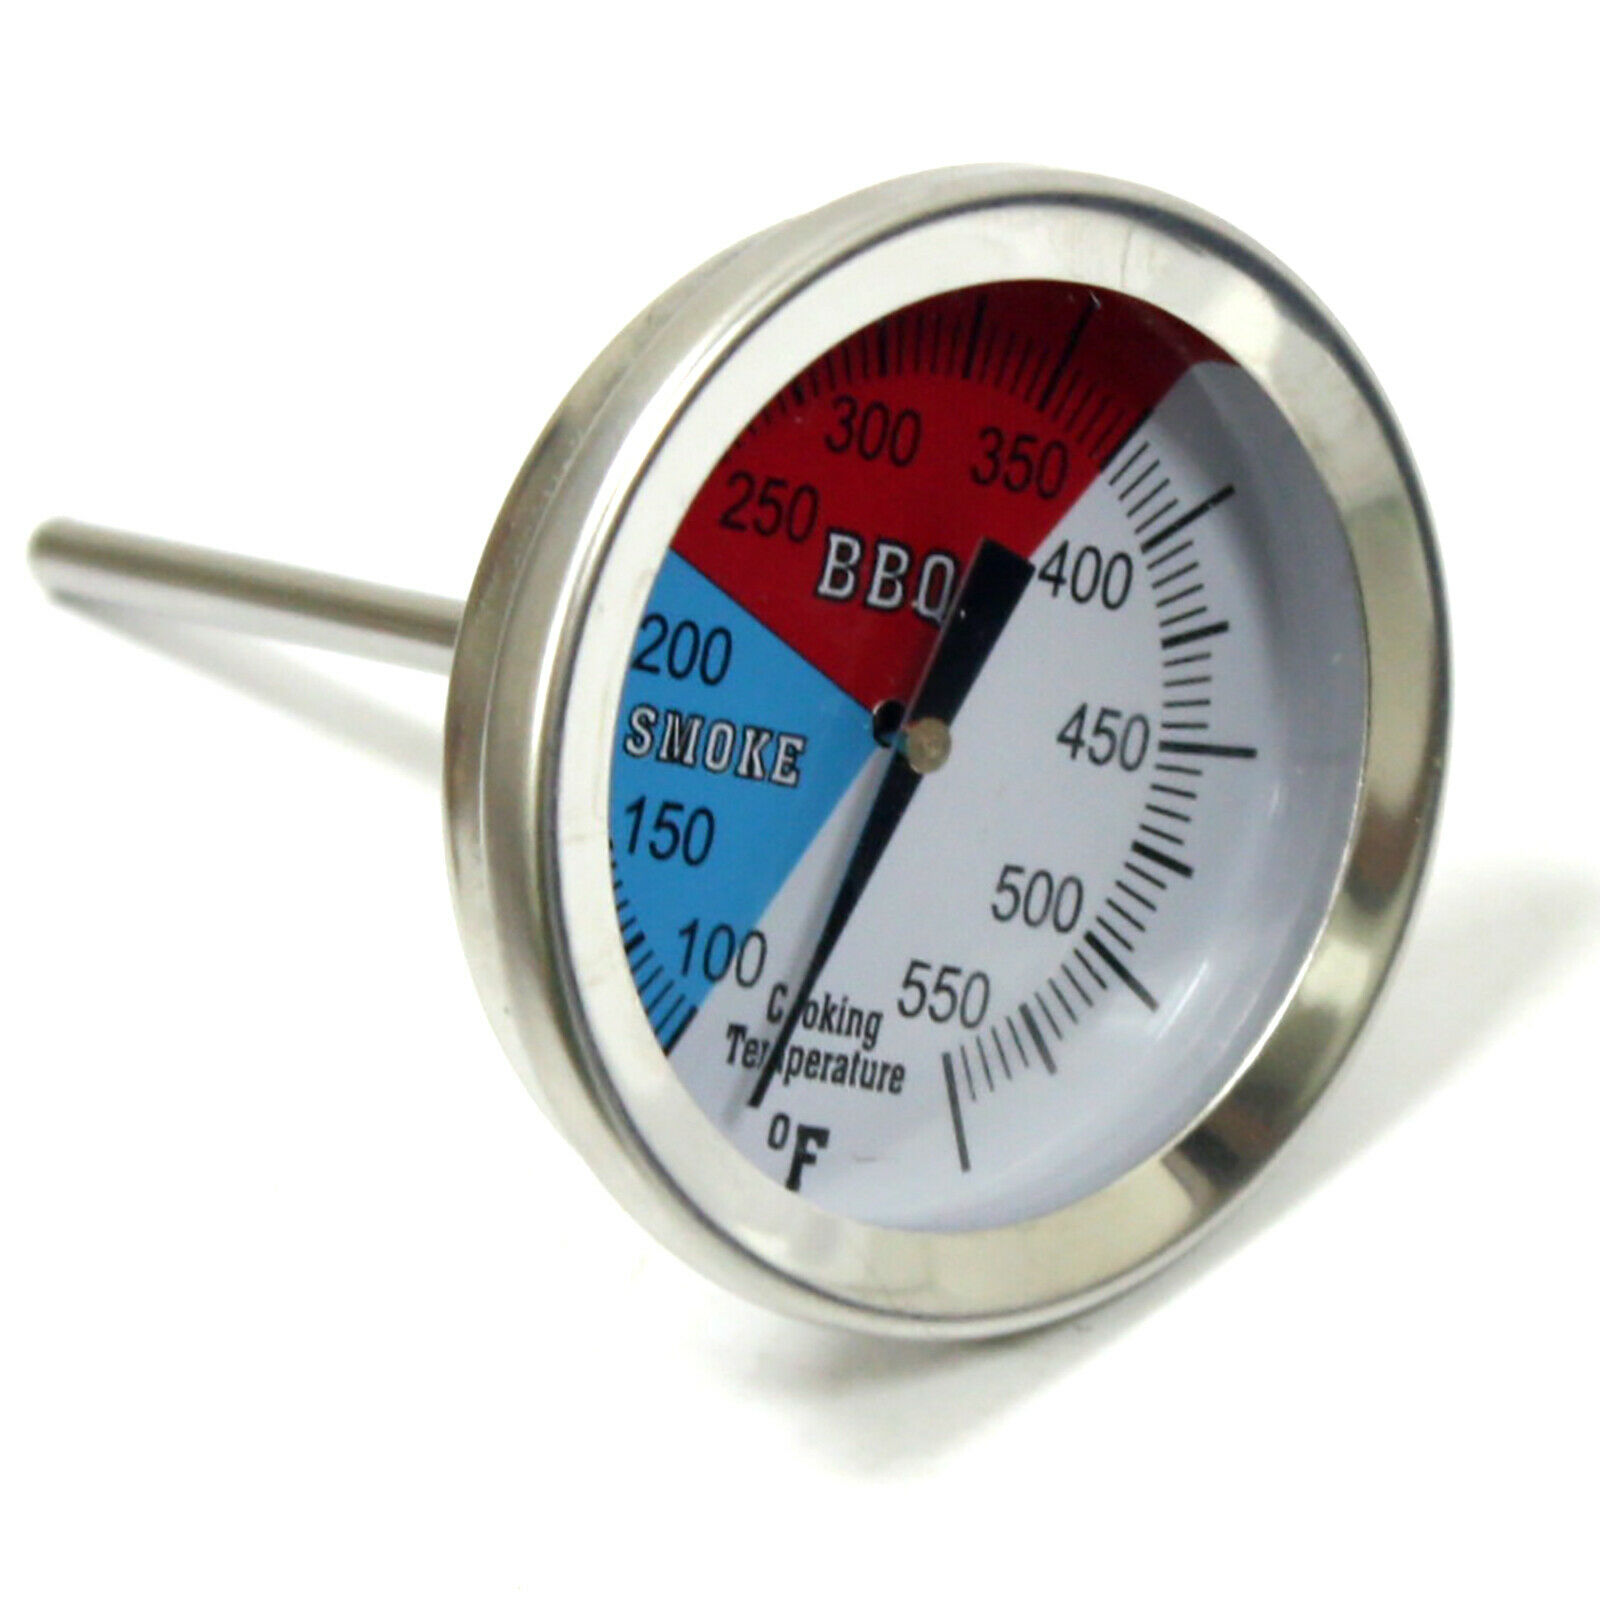 2" Temperature Gauge Thermometer for Barbecue BBQ Grill Smoker Pit Thermostat 